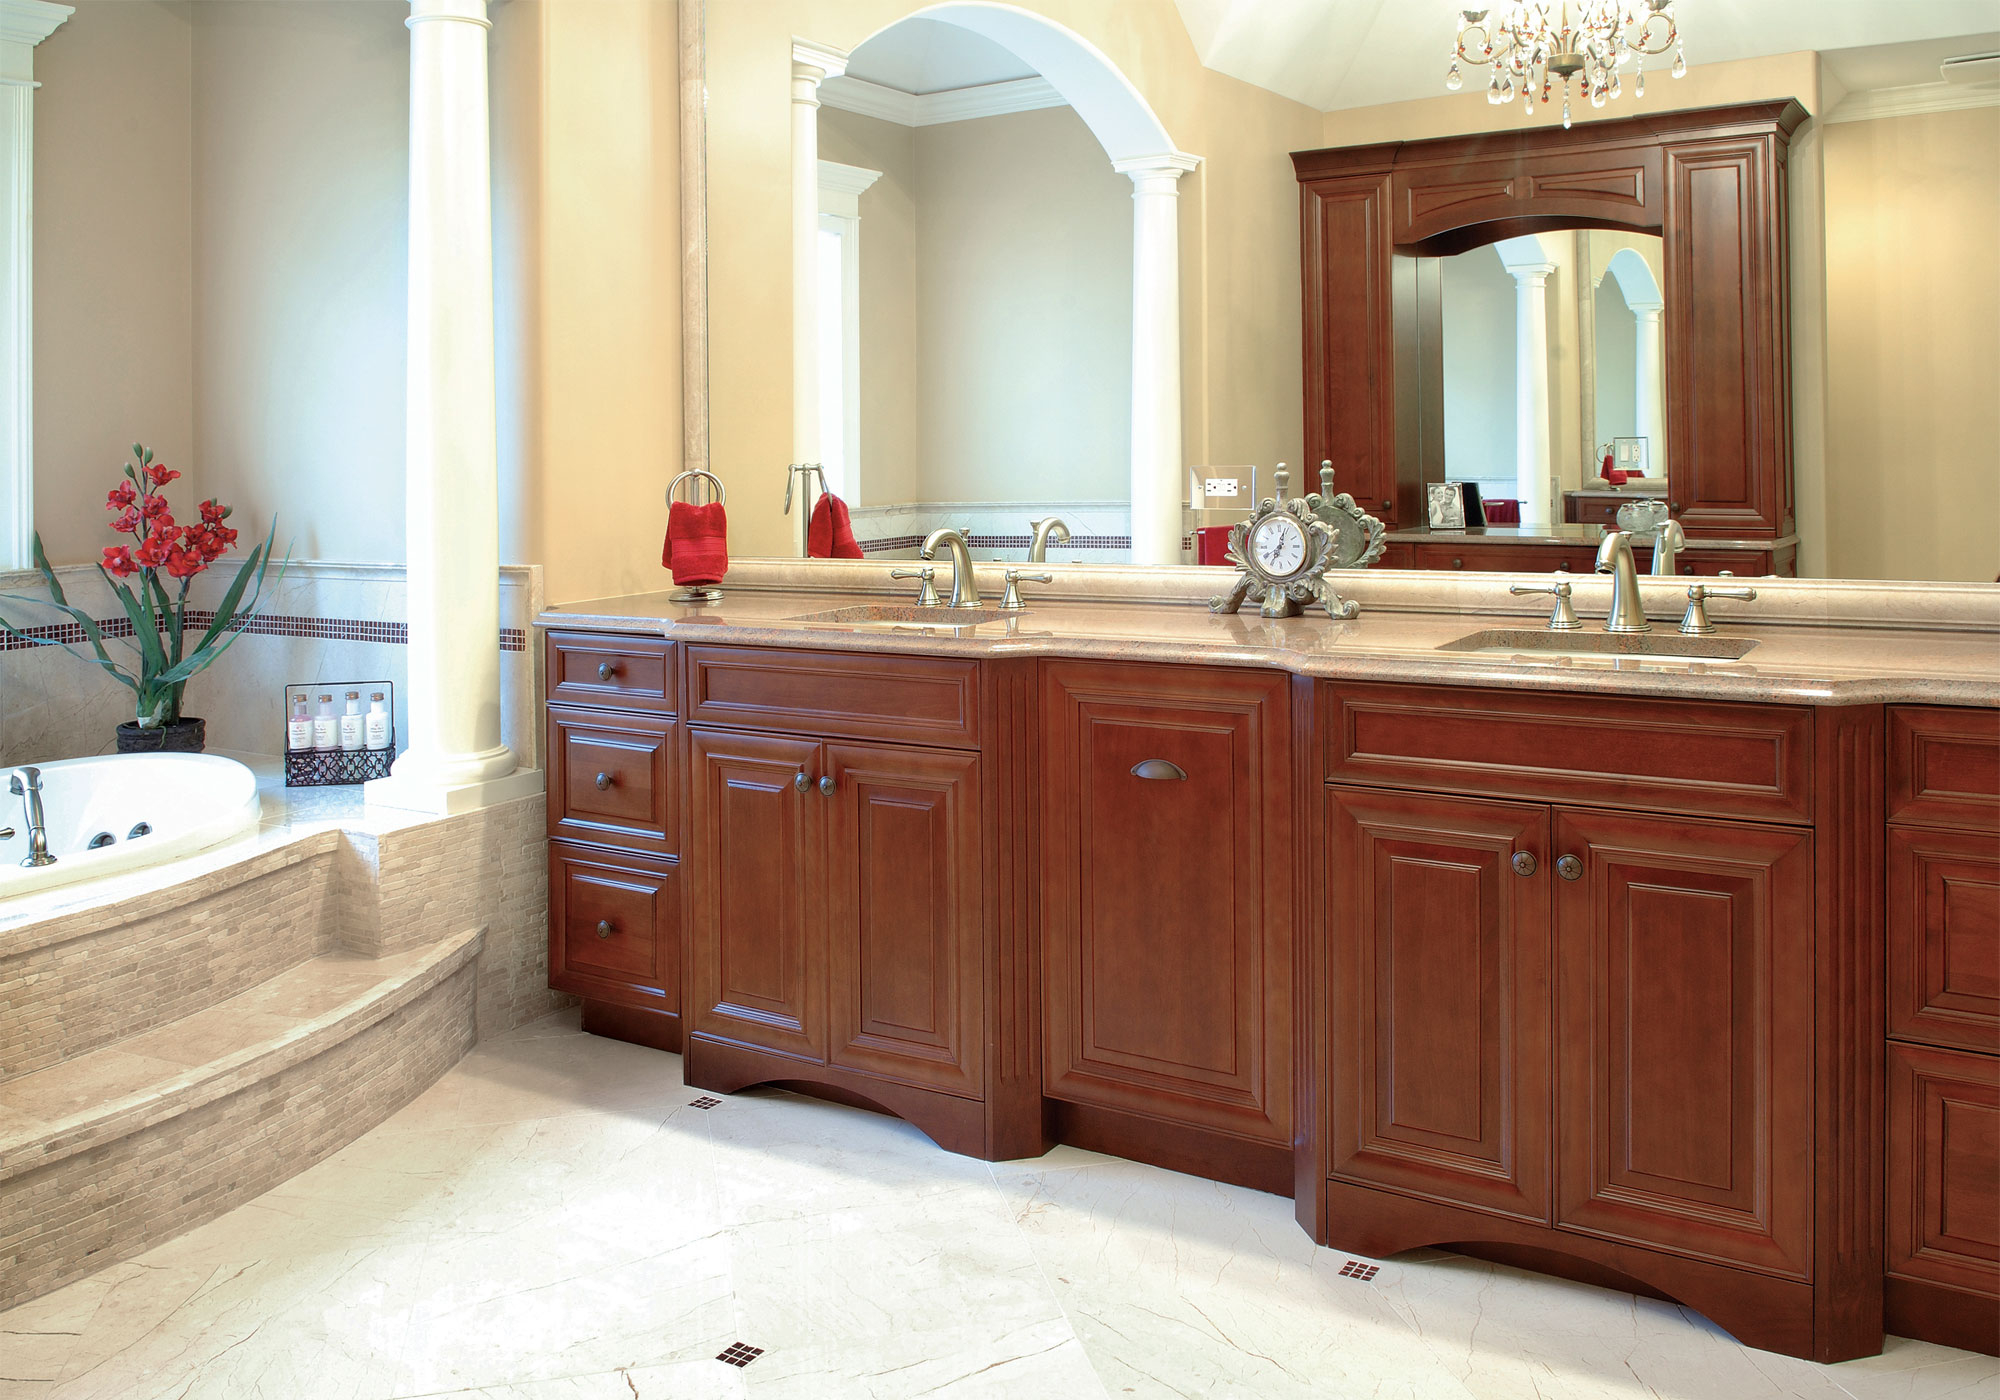 Kitchen Cabinets Bathroom Vanity Cabinets Advanced Cabinets within sizing 2000 X 1400